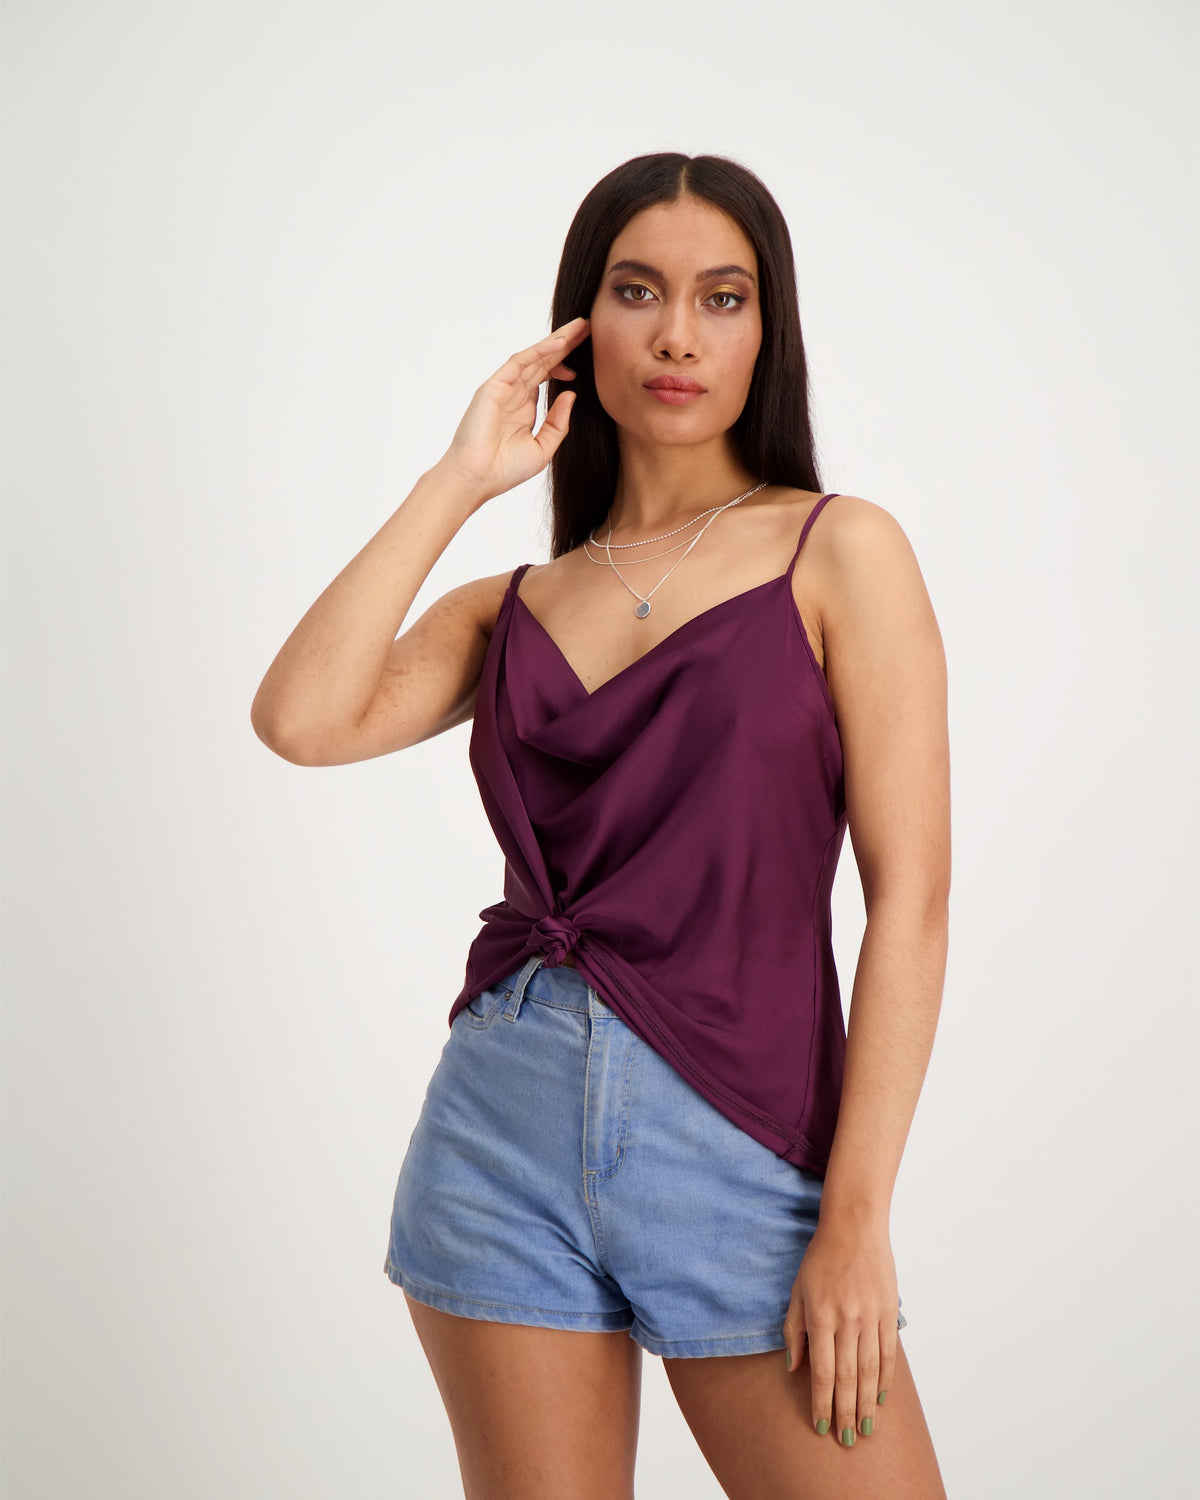 Burgundy cowl neck cami looks and feels gorgeous. Fashioned from silky smooth Armani satin